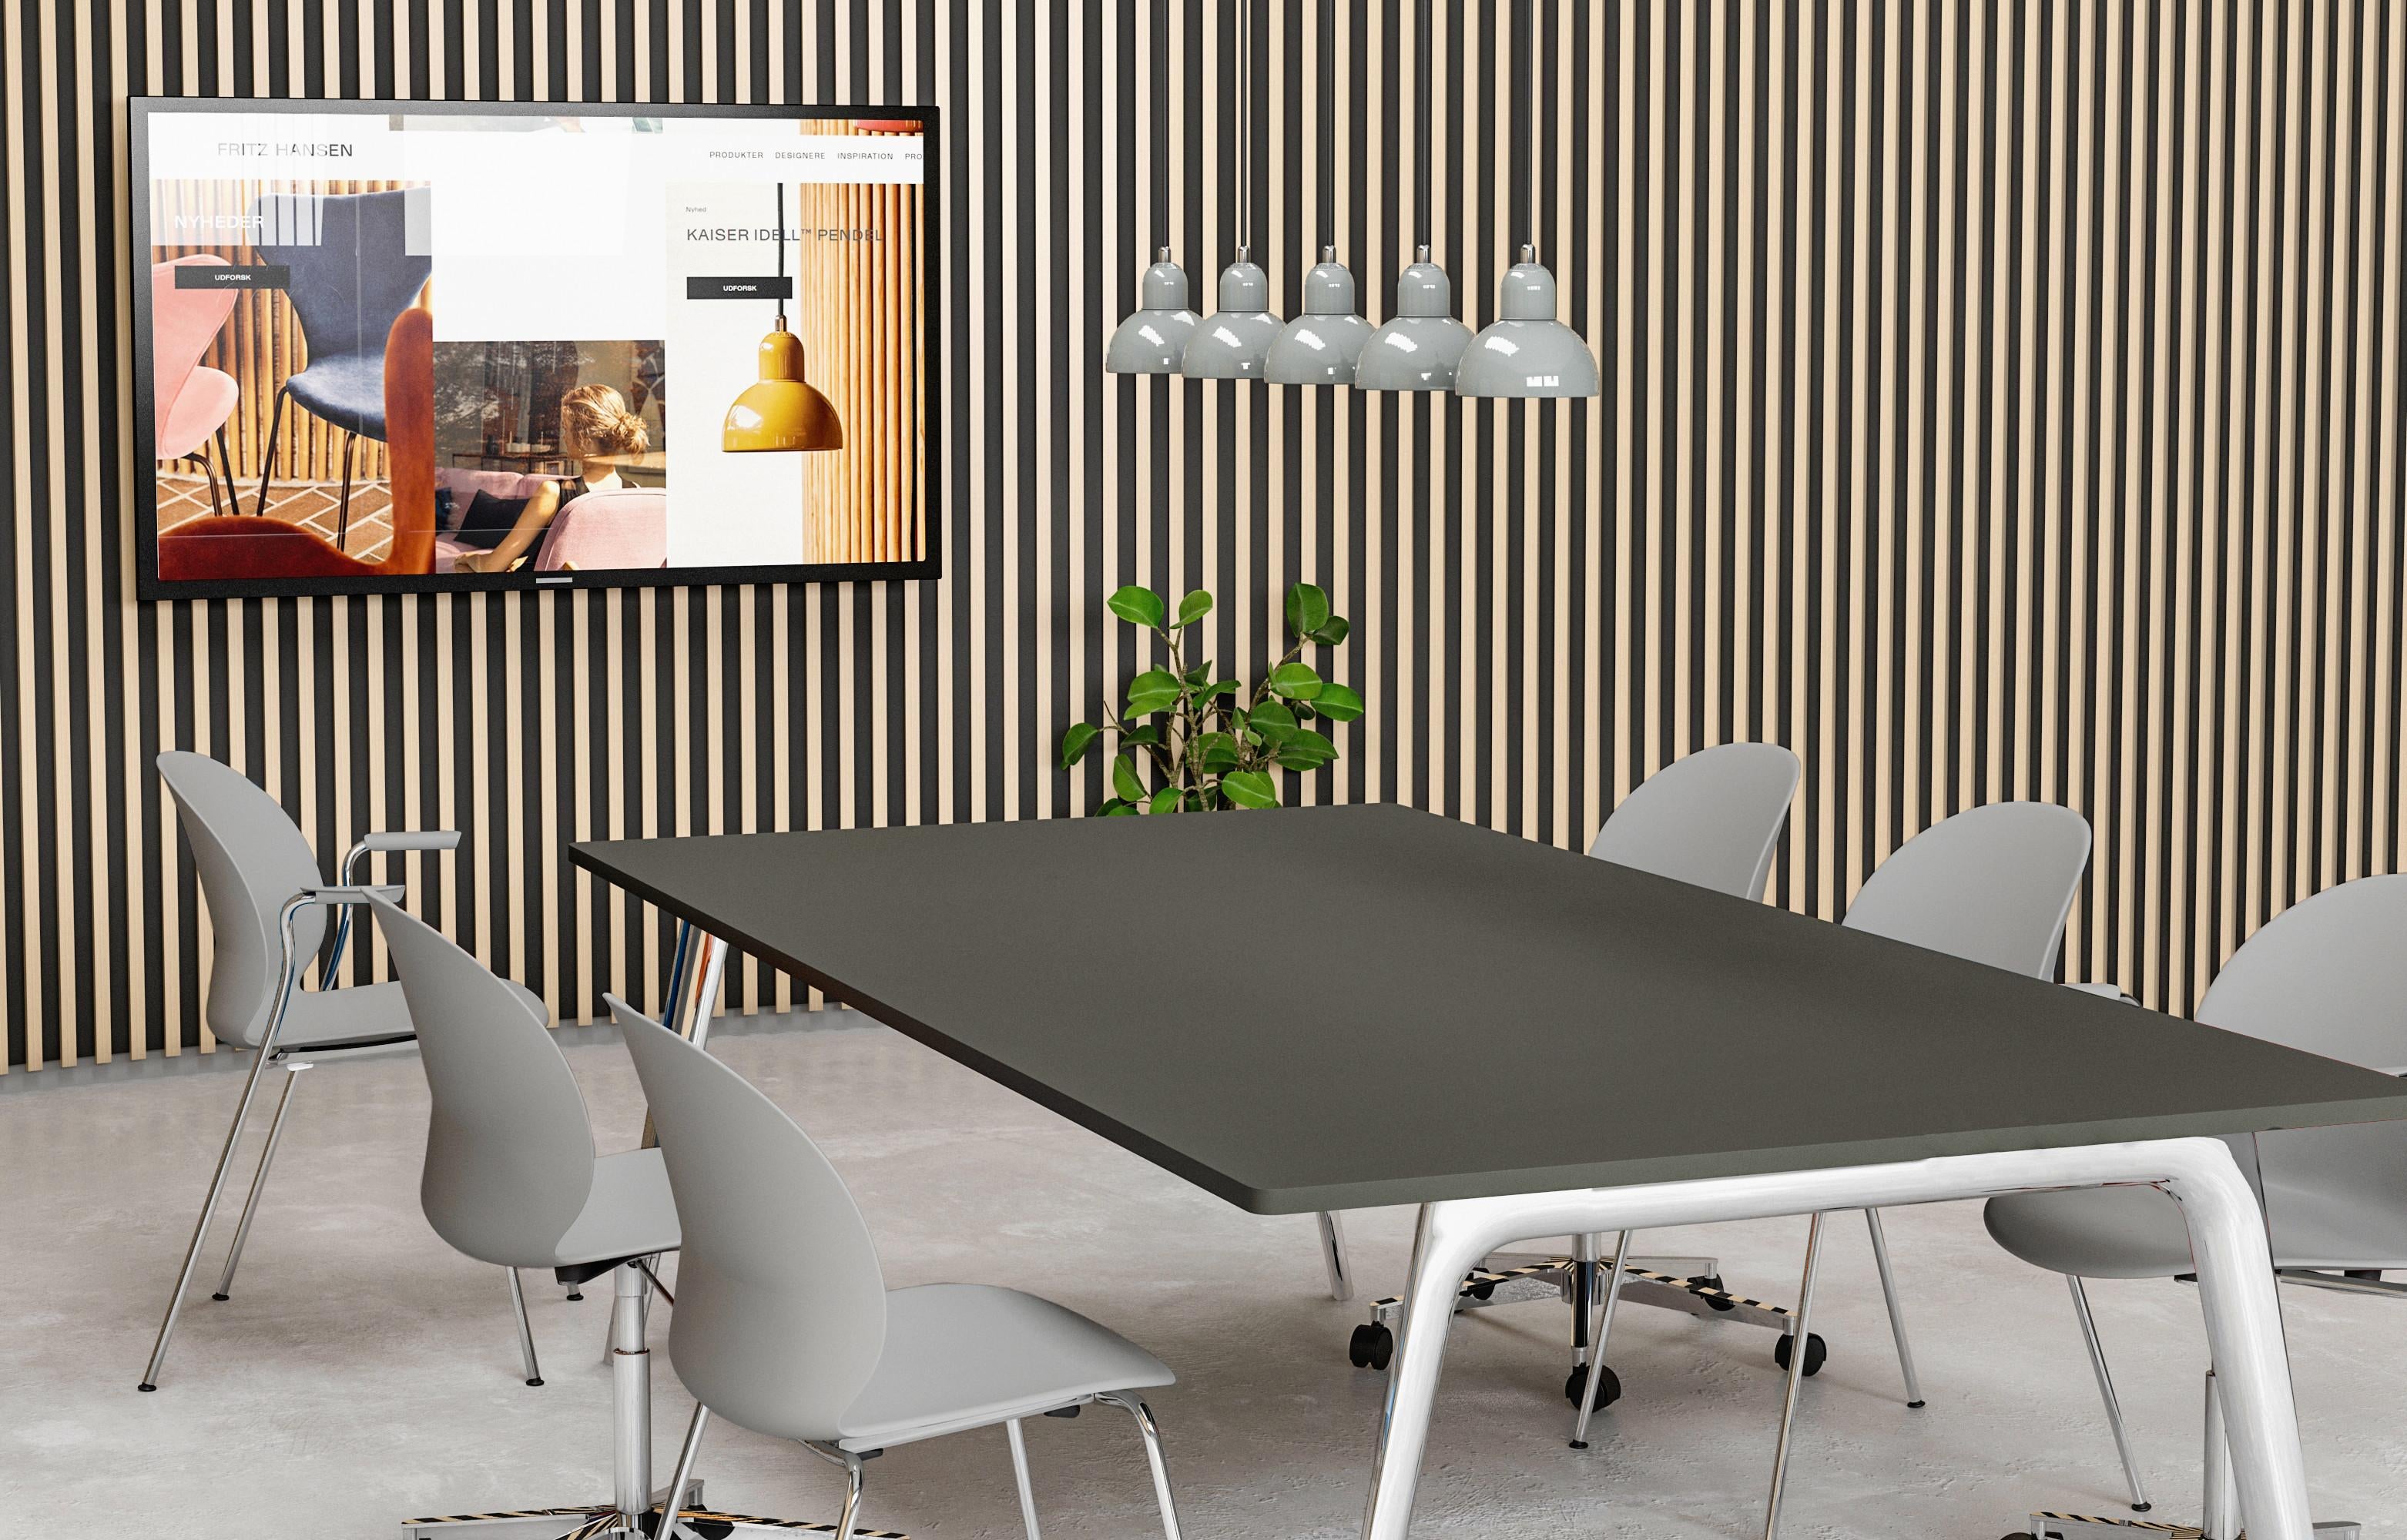 Christian Dell 'Kaiser Idell 6722-P' Pendant for Fritz Hansen in Smooth Slate.

 Established in 1872, Fritz Hansen has become synonymous with legendary Danish design. Combining timeless craftsmanship with an emphasis on sustainability, the brand’s